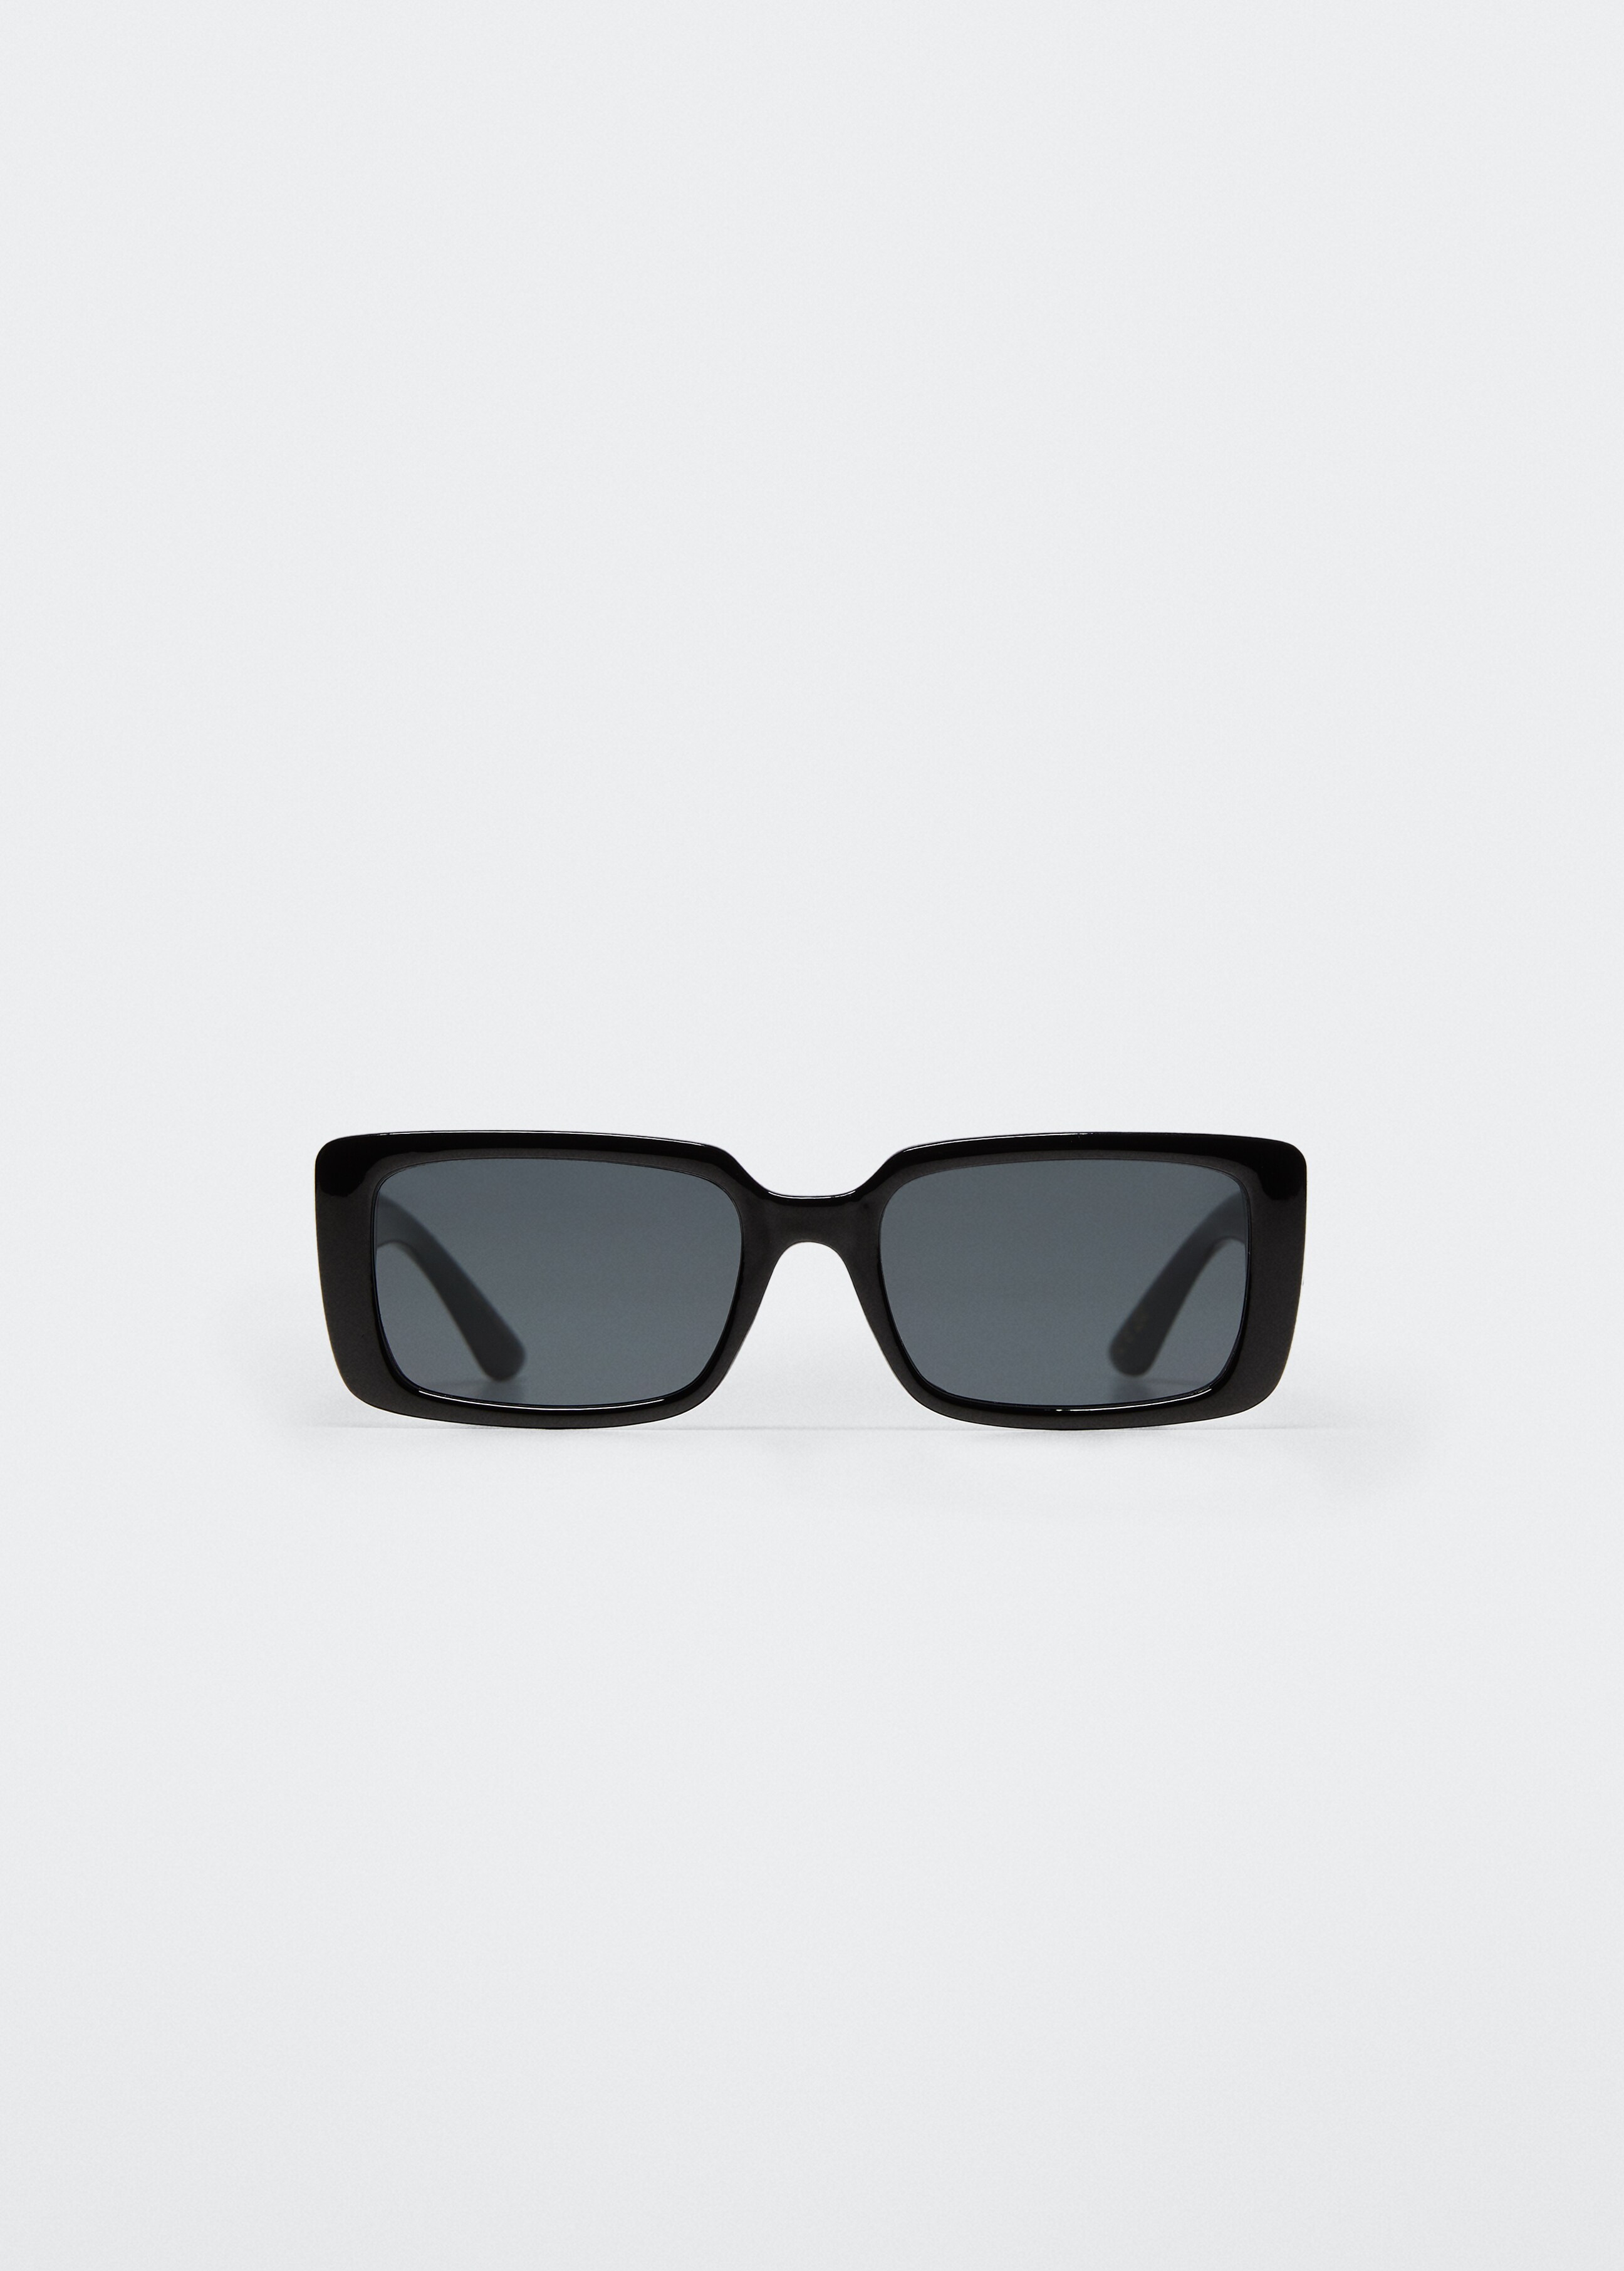 Acetate frame sunglasses - Article without model